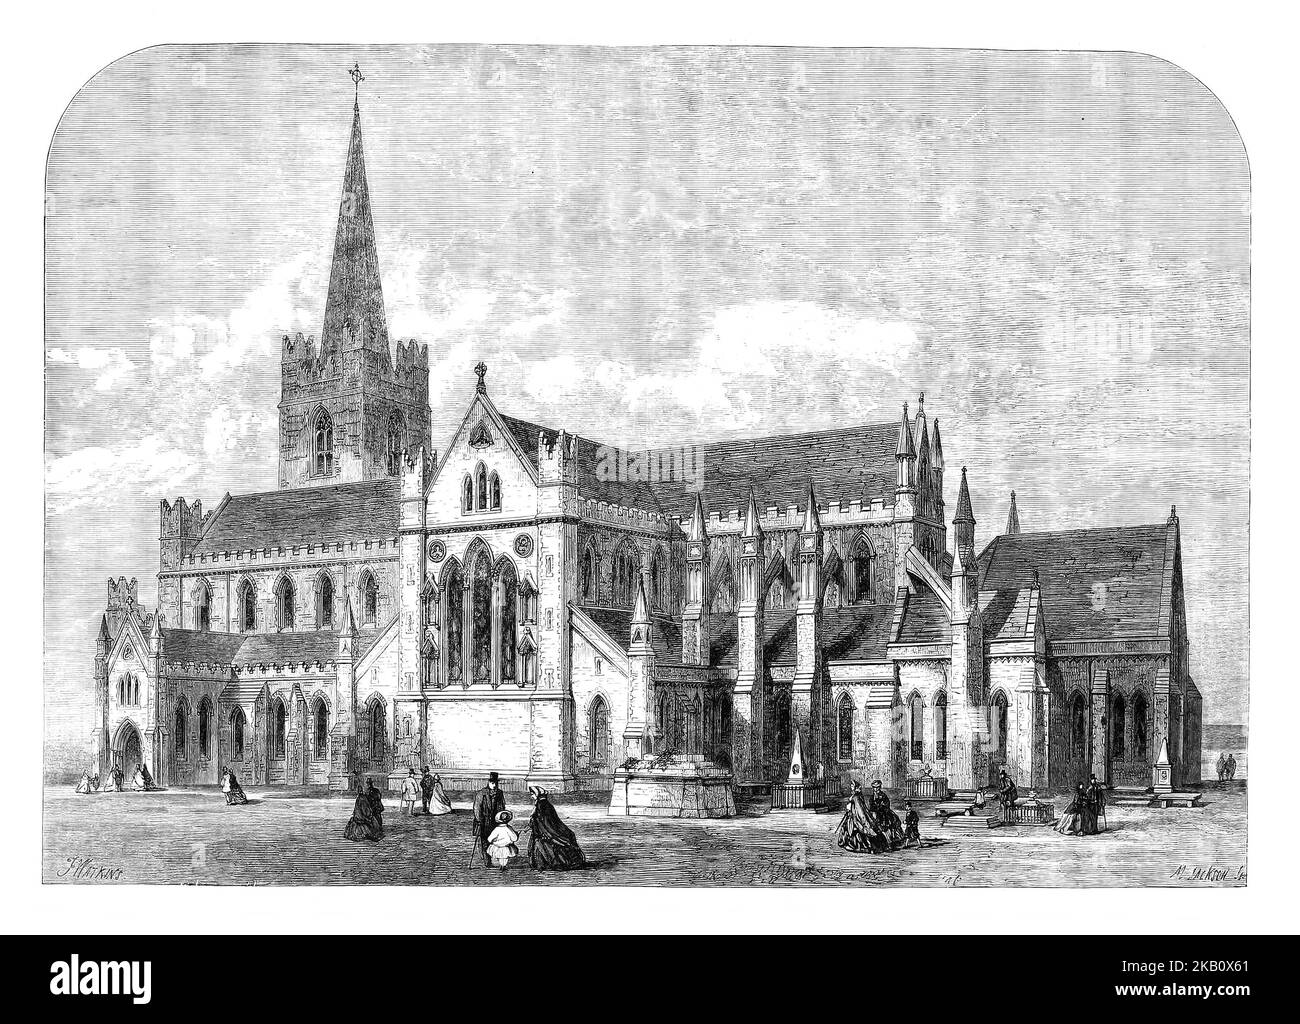 The exterior of the restored St Patrick's Cathedral in Dublin Ireland. In 1805, the north transept was in ruins and the south transept was in a poor condition. Major reconstruction, paid for by Benjamin Guinness, in 1860–65, was inspired by the fear that the cathedral was in imminent danger of collapse, so much of the current building and decoration dates from the Victorian era and few records of the work survive today. A failure to preserve records means that little is known as to how much of the current building is genuinely mediæval and how much is Victorian pastiche. Stock Photo